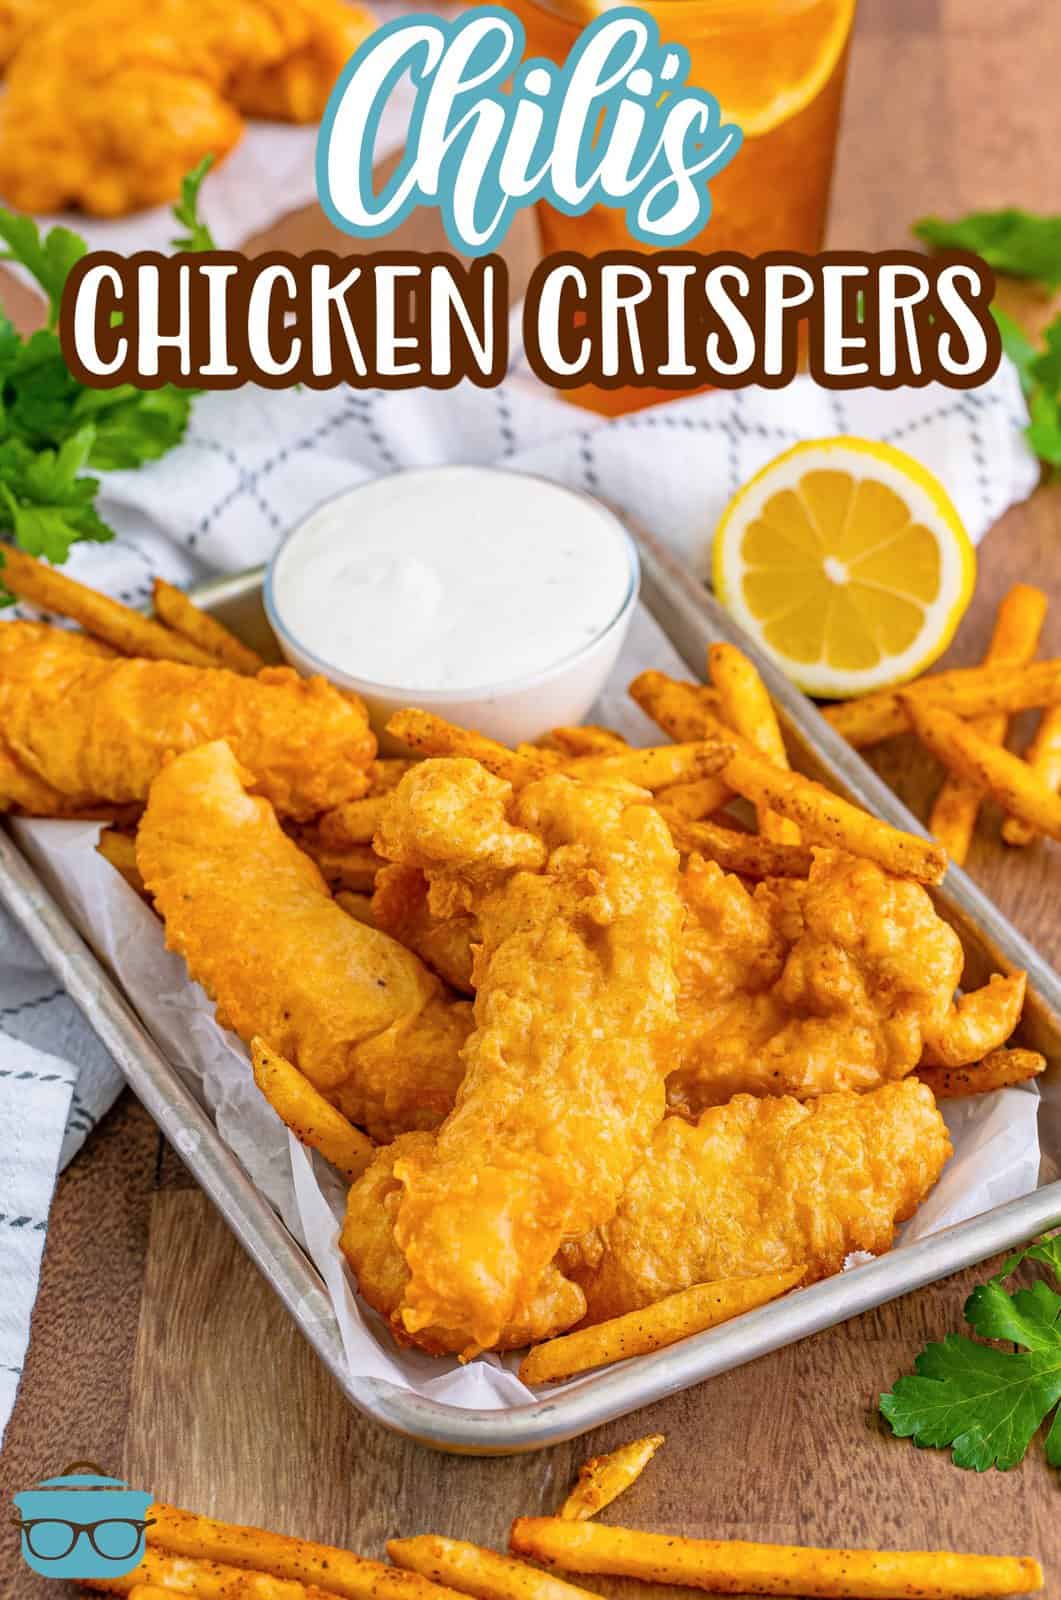 A tray of chicken crispers, a copycat recipe from Chili's.